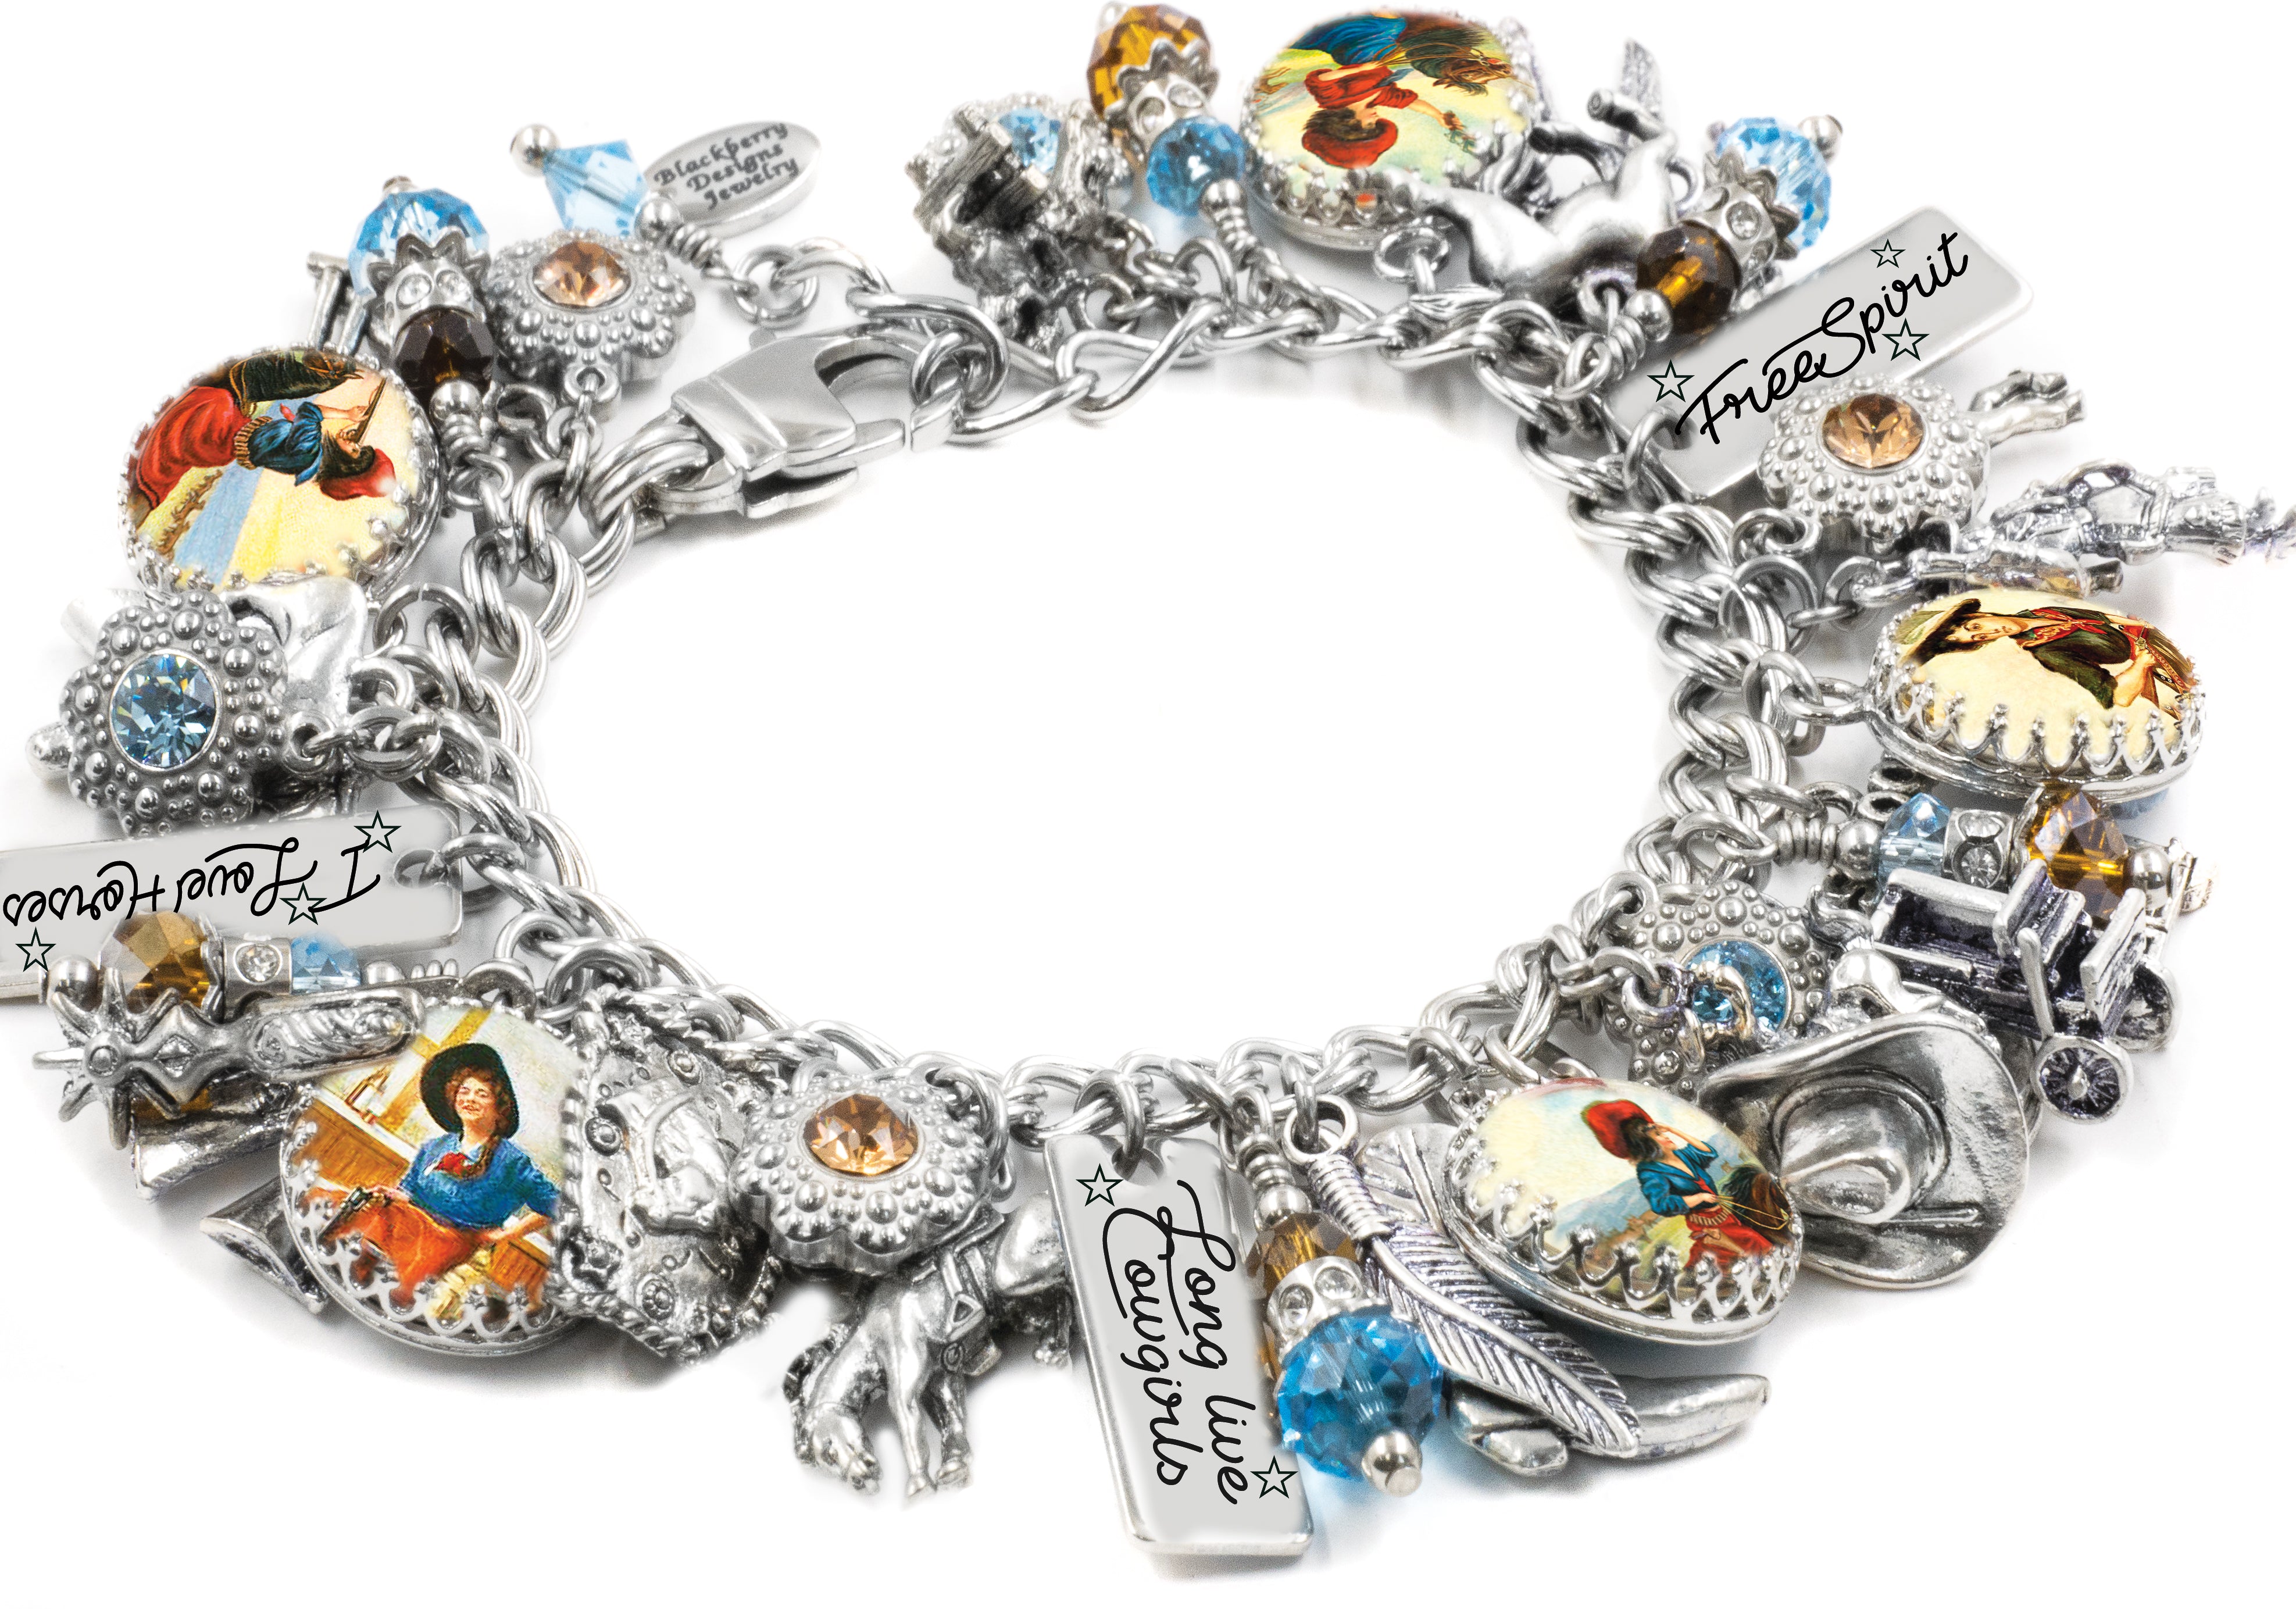 Cowgirl Western + Stainless Steel + Charm Bracelets